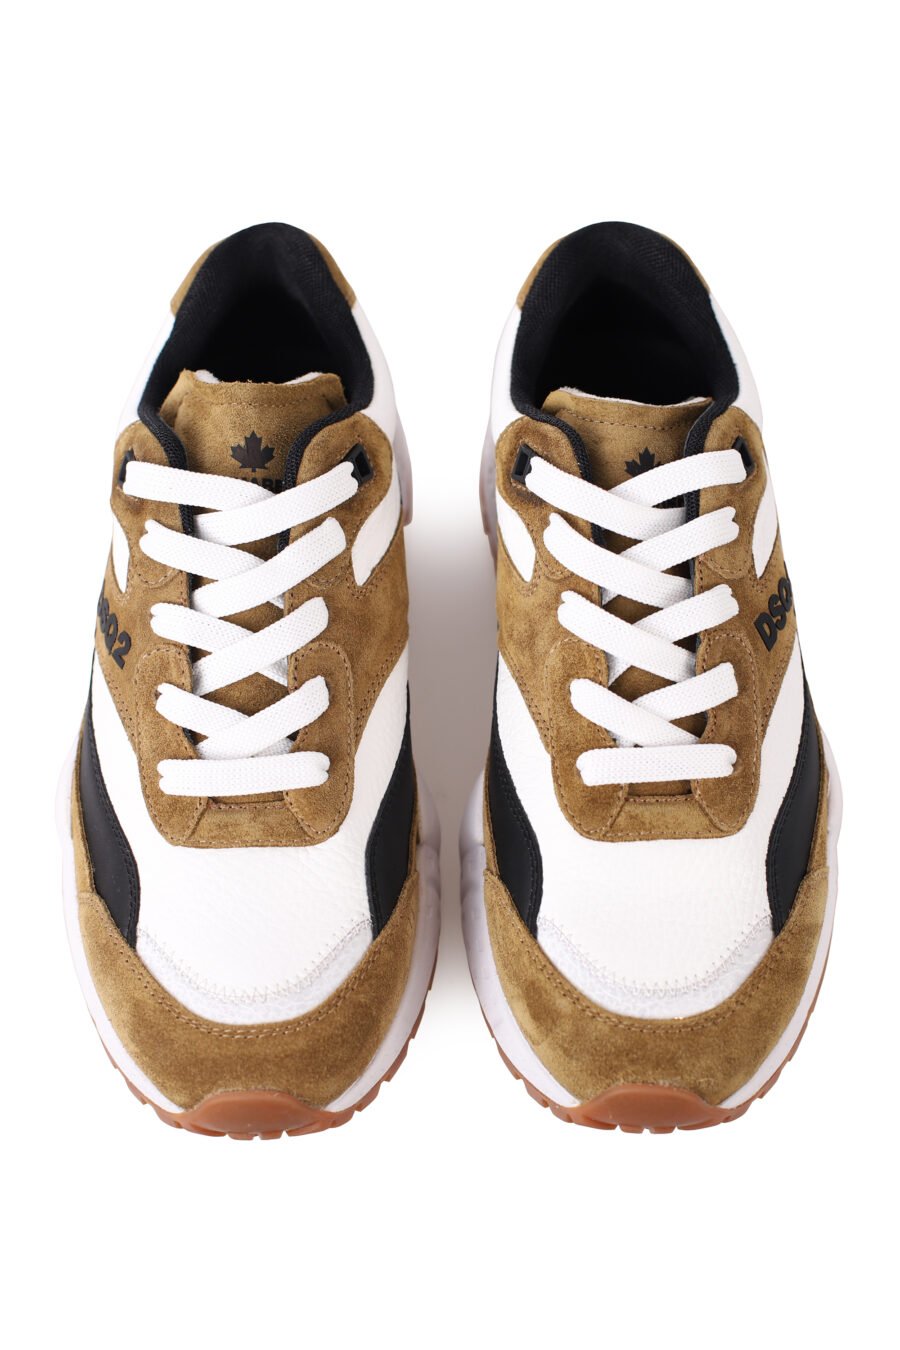 Camel coloured trainers with Dsq2" logo and black and white details - IMG 0331